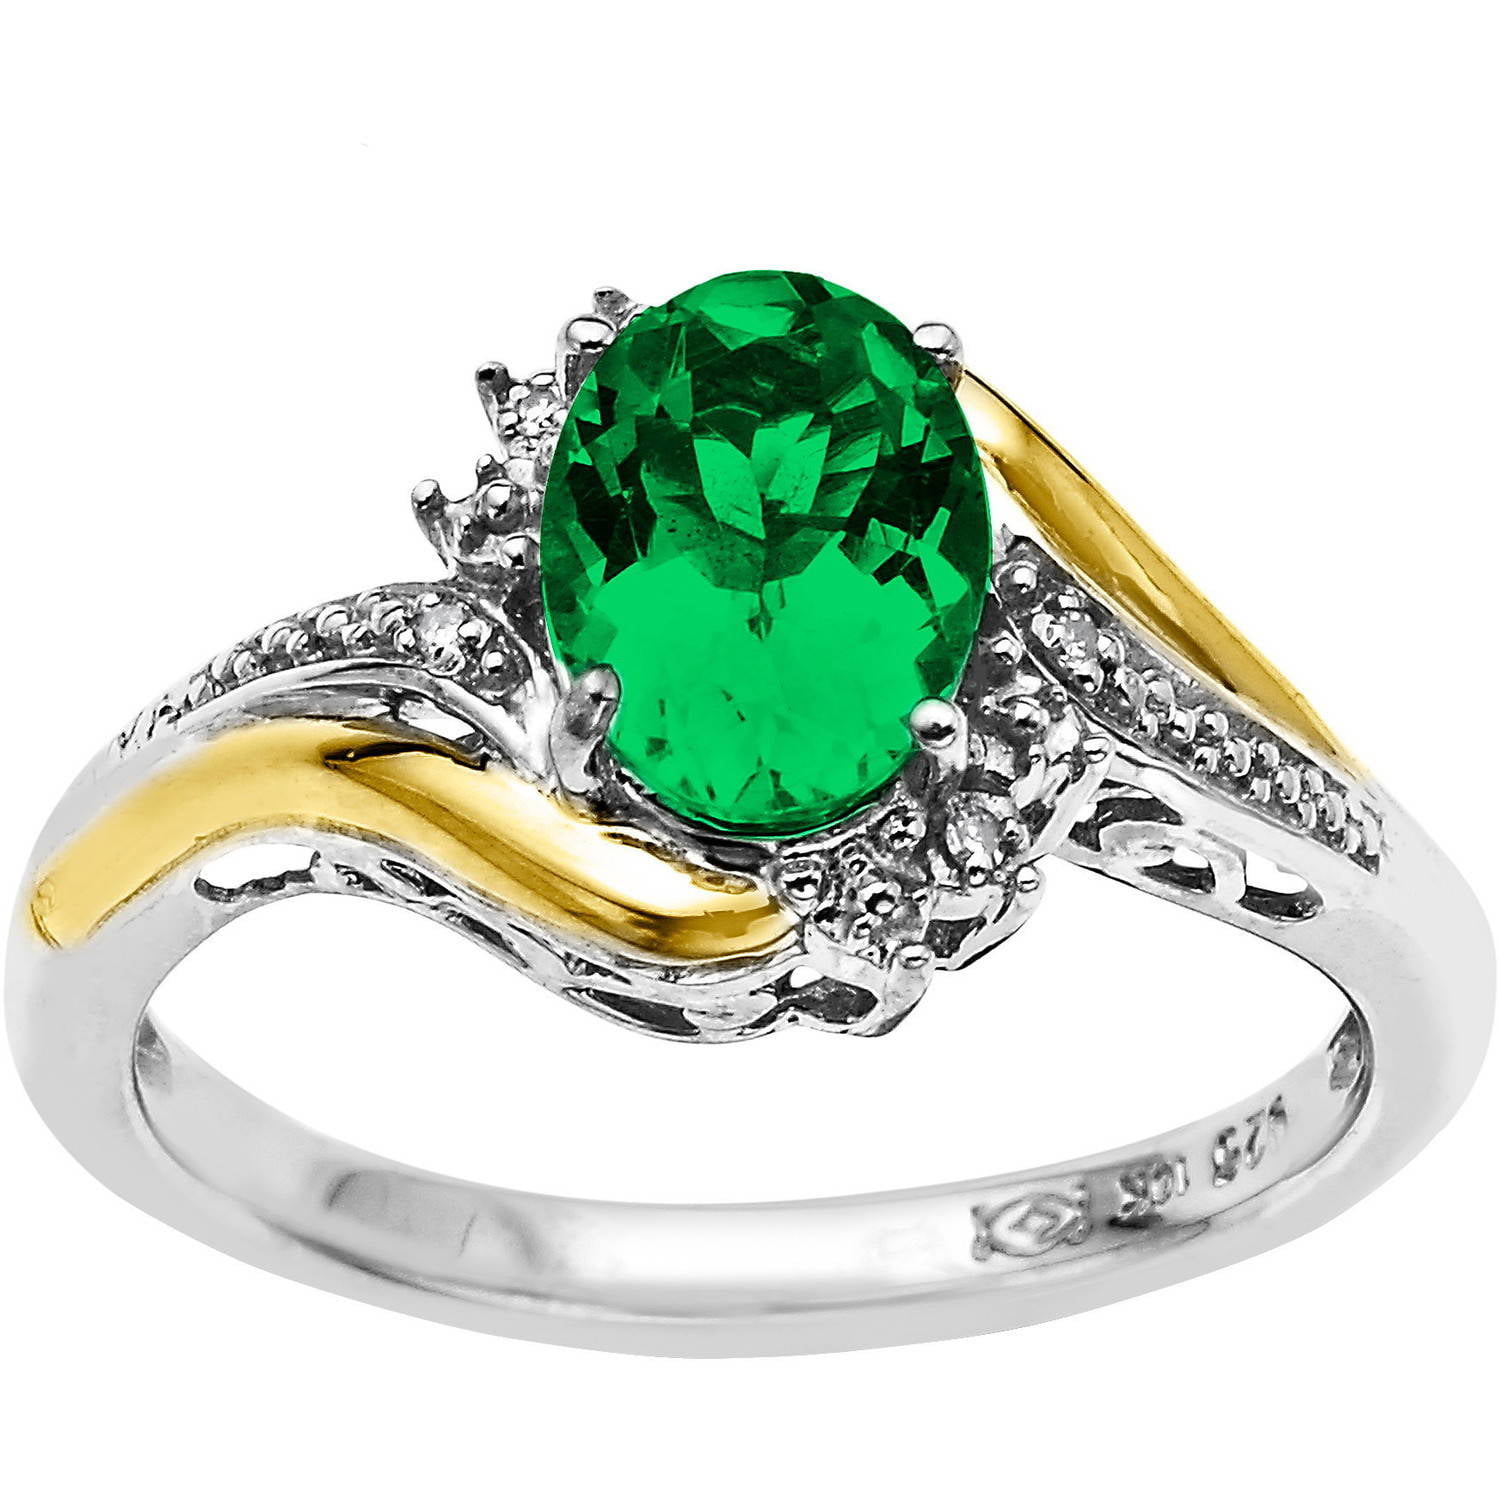 West Coast Jewelry Sterling Silver Oval Diamond and Green Quartz Ring